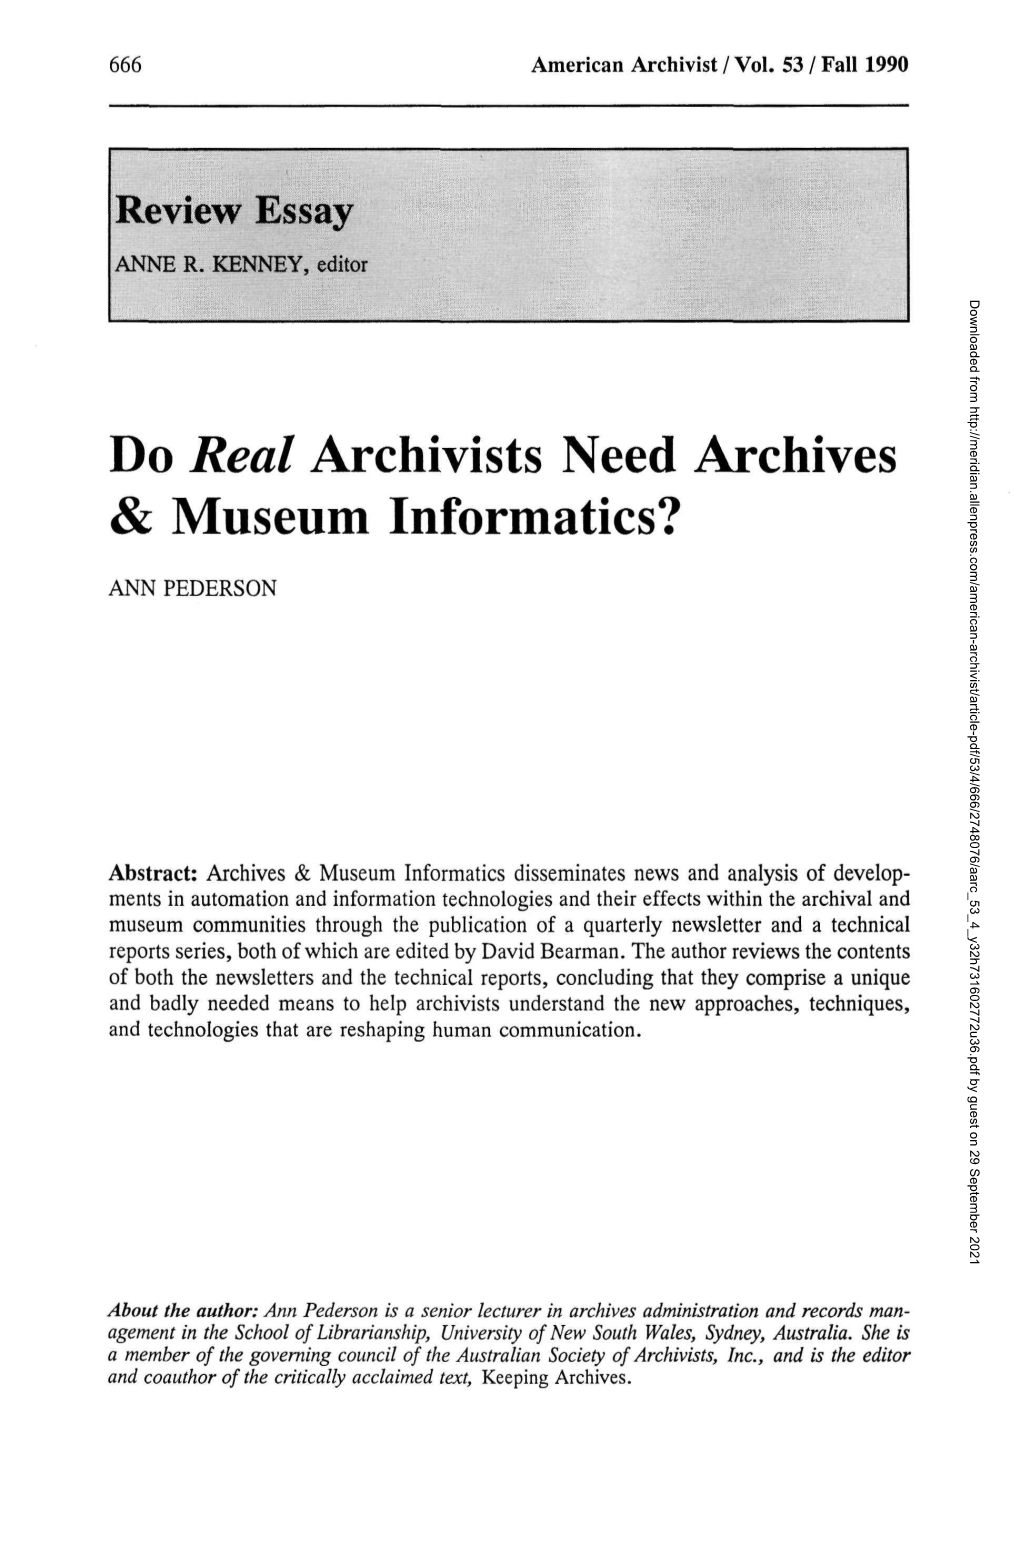 Do Real Archivists Need Archives & Museum Informatics?